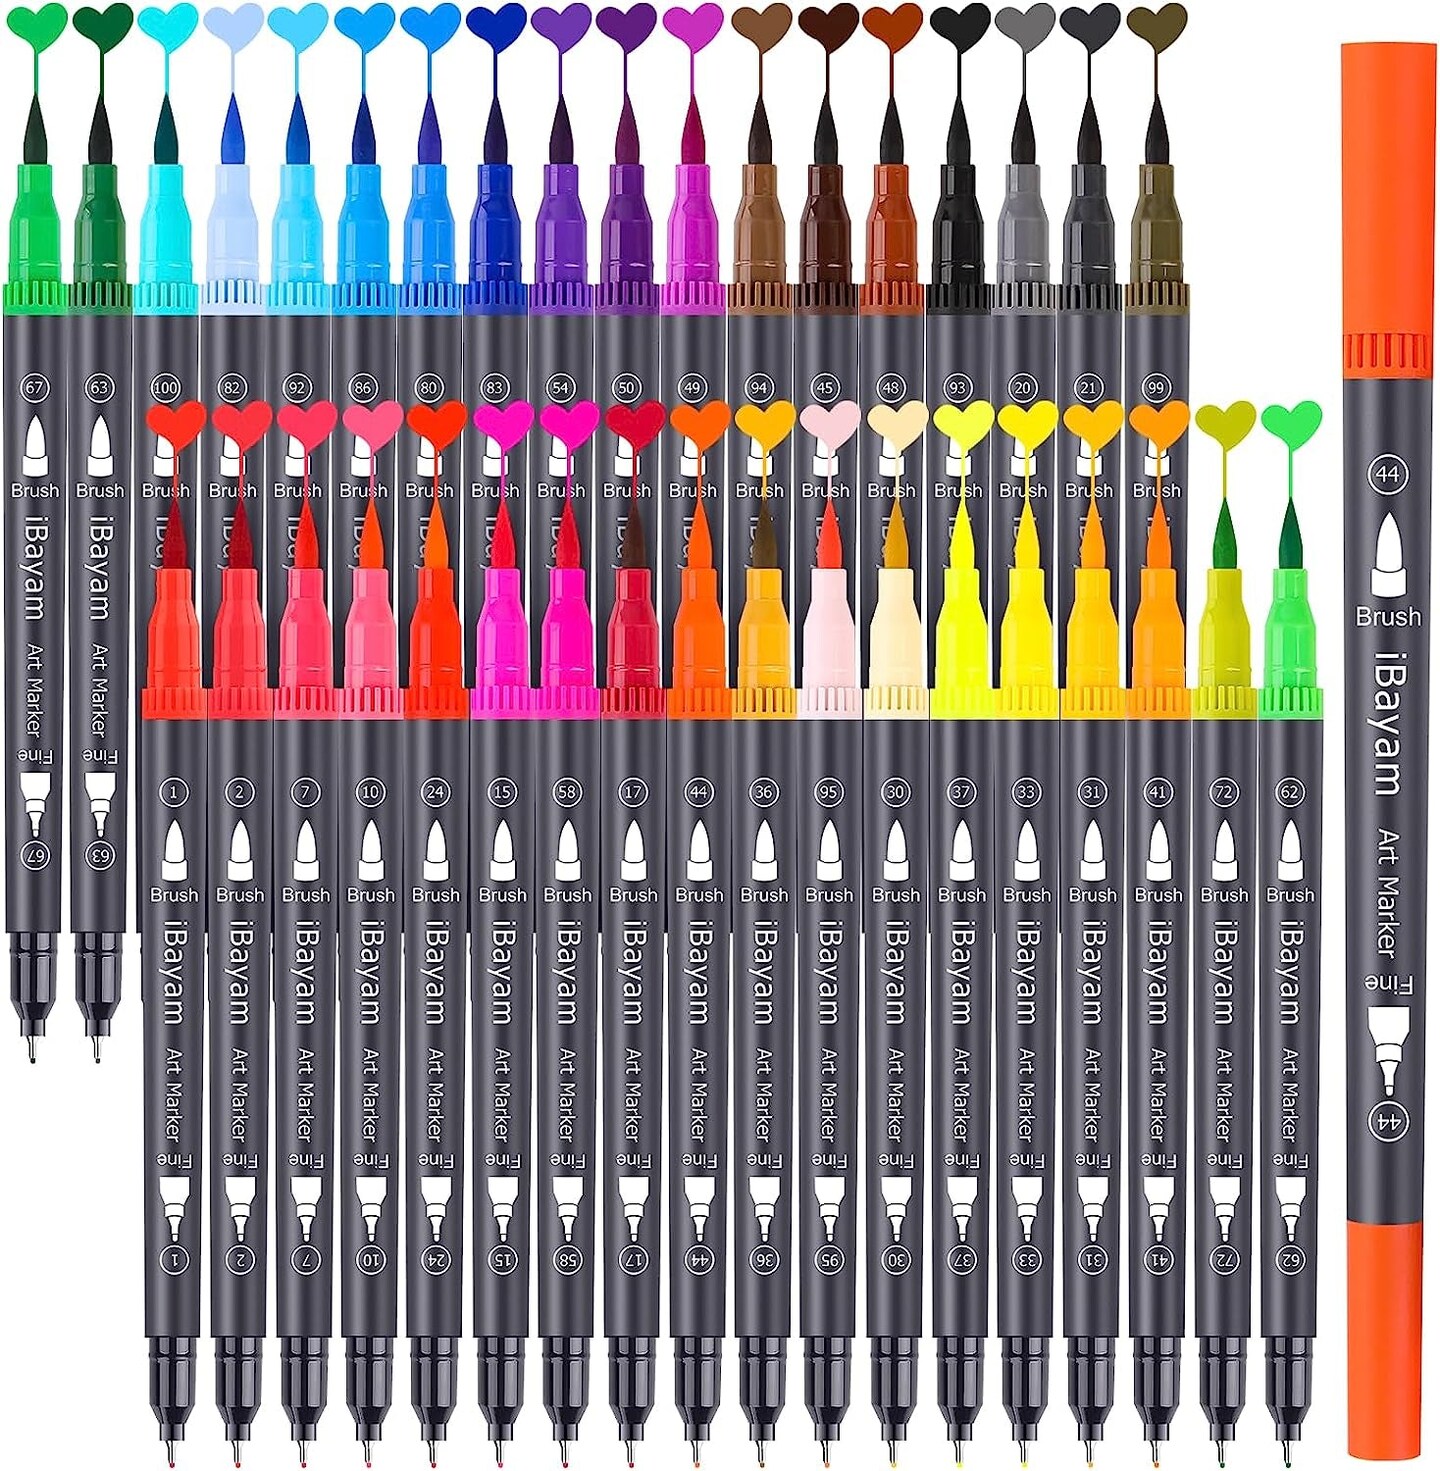 Office Stationery, Art Marker Brush, Drawing Tools, Pen Supplies